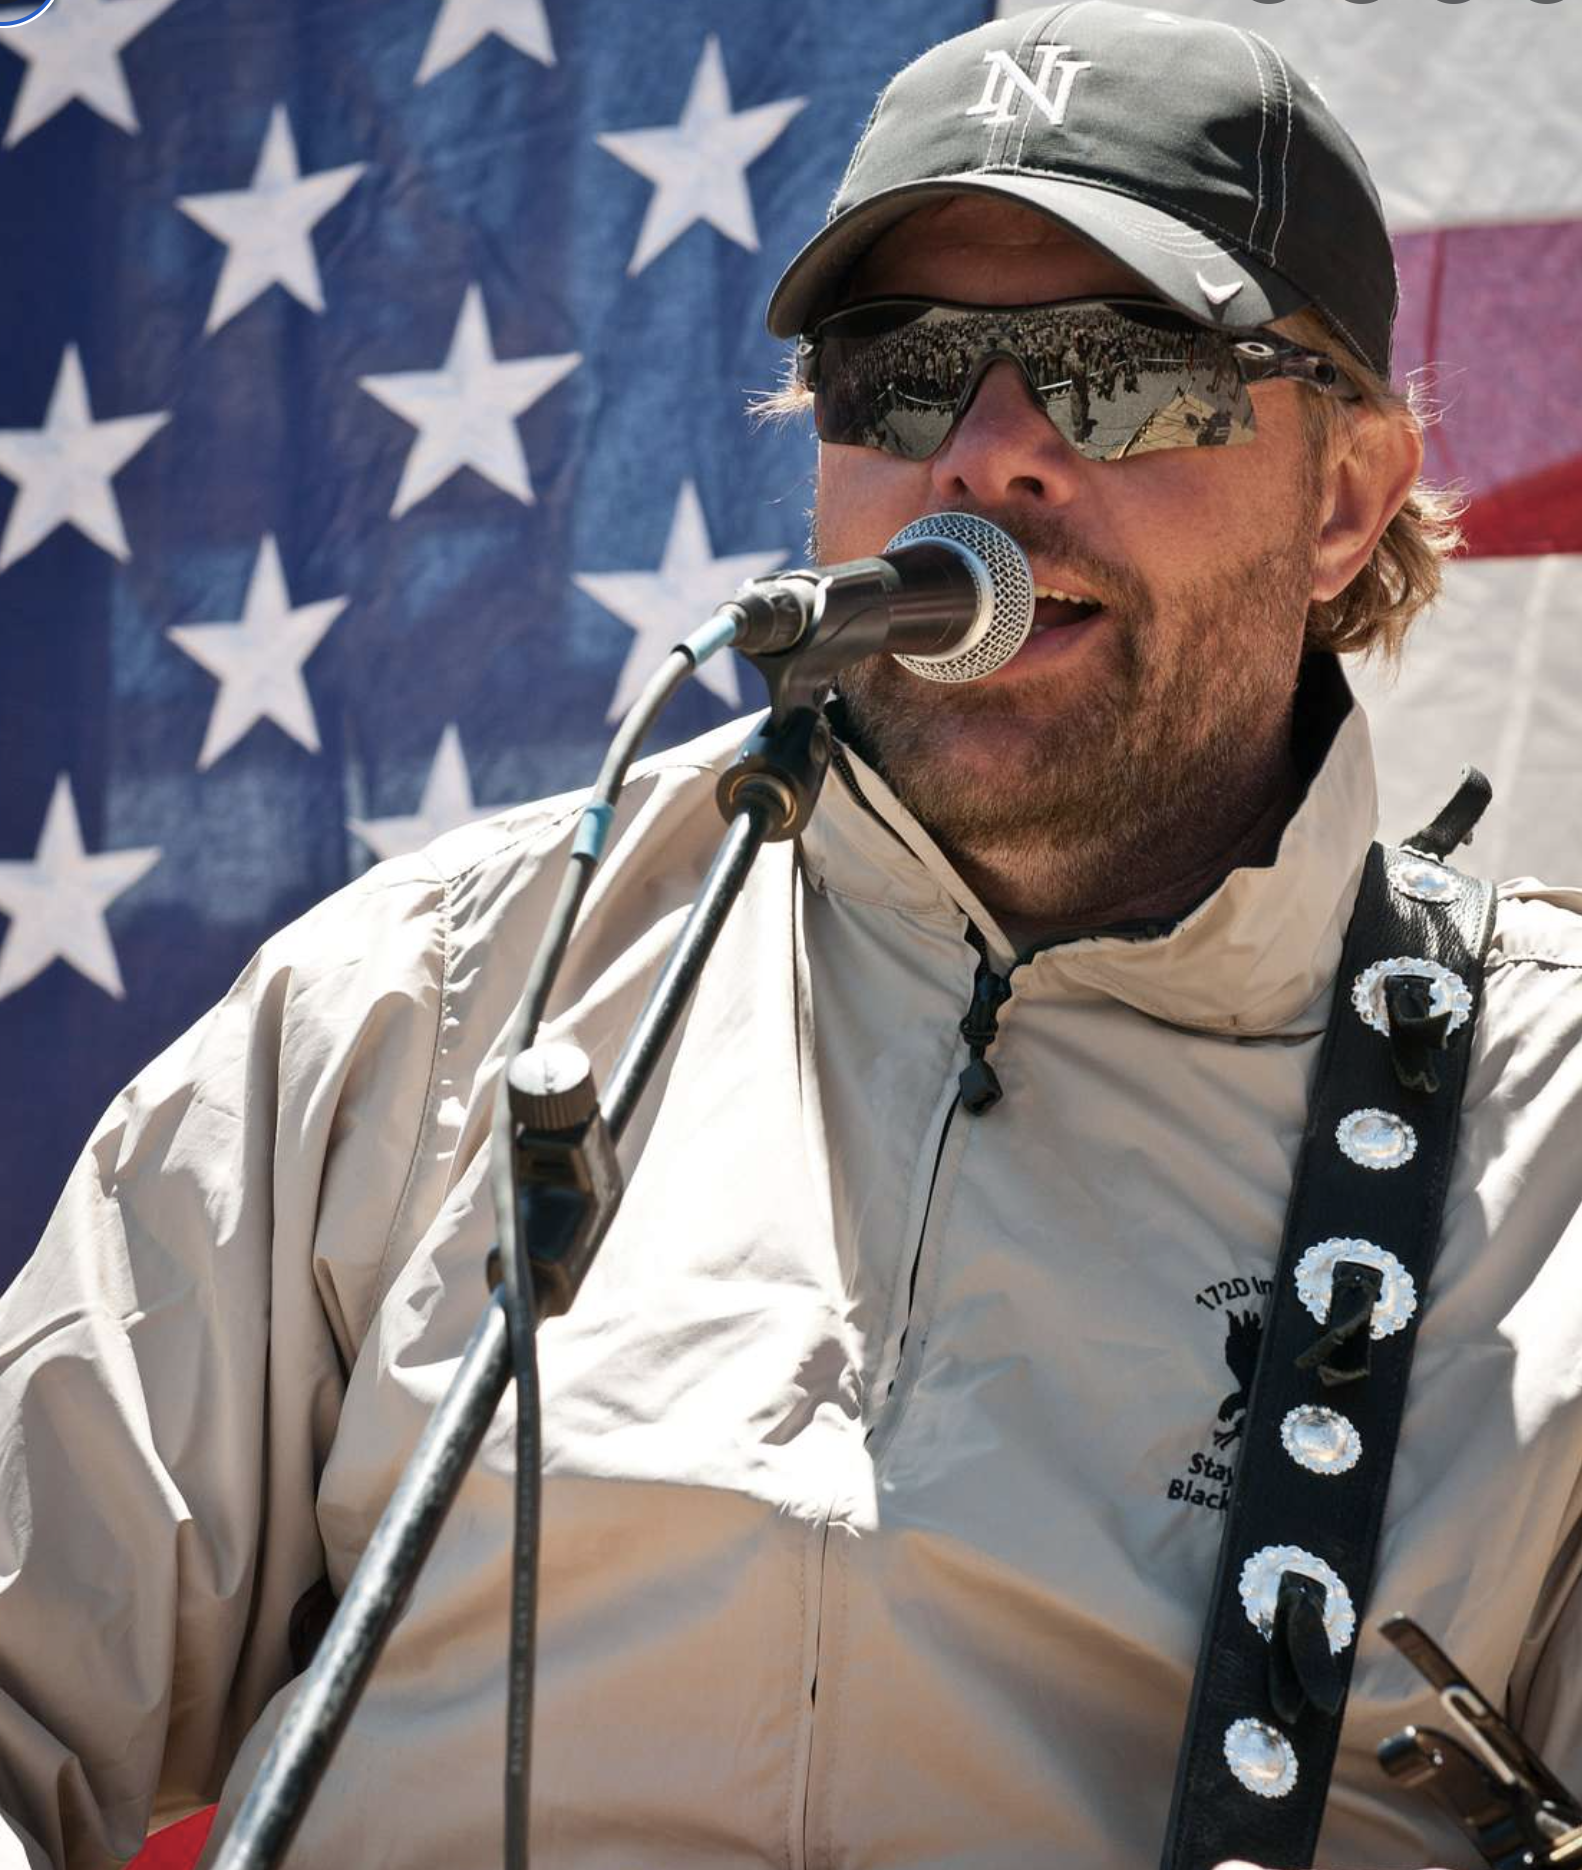 Toby Keith performs at Forward Operating Base Sharana in Paktika Province, Afghanistan